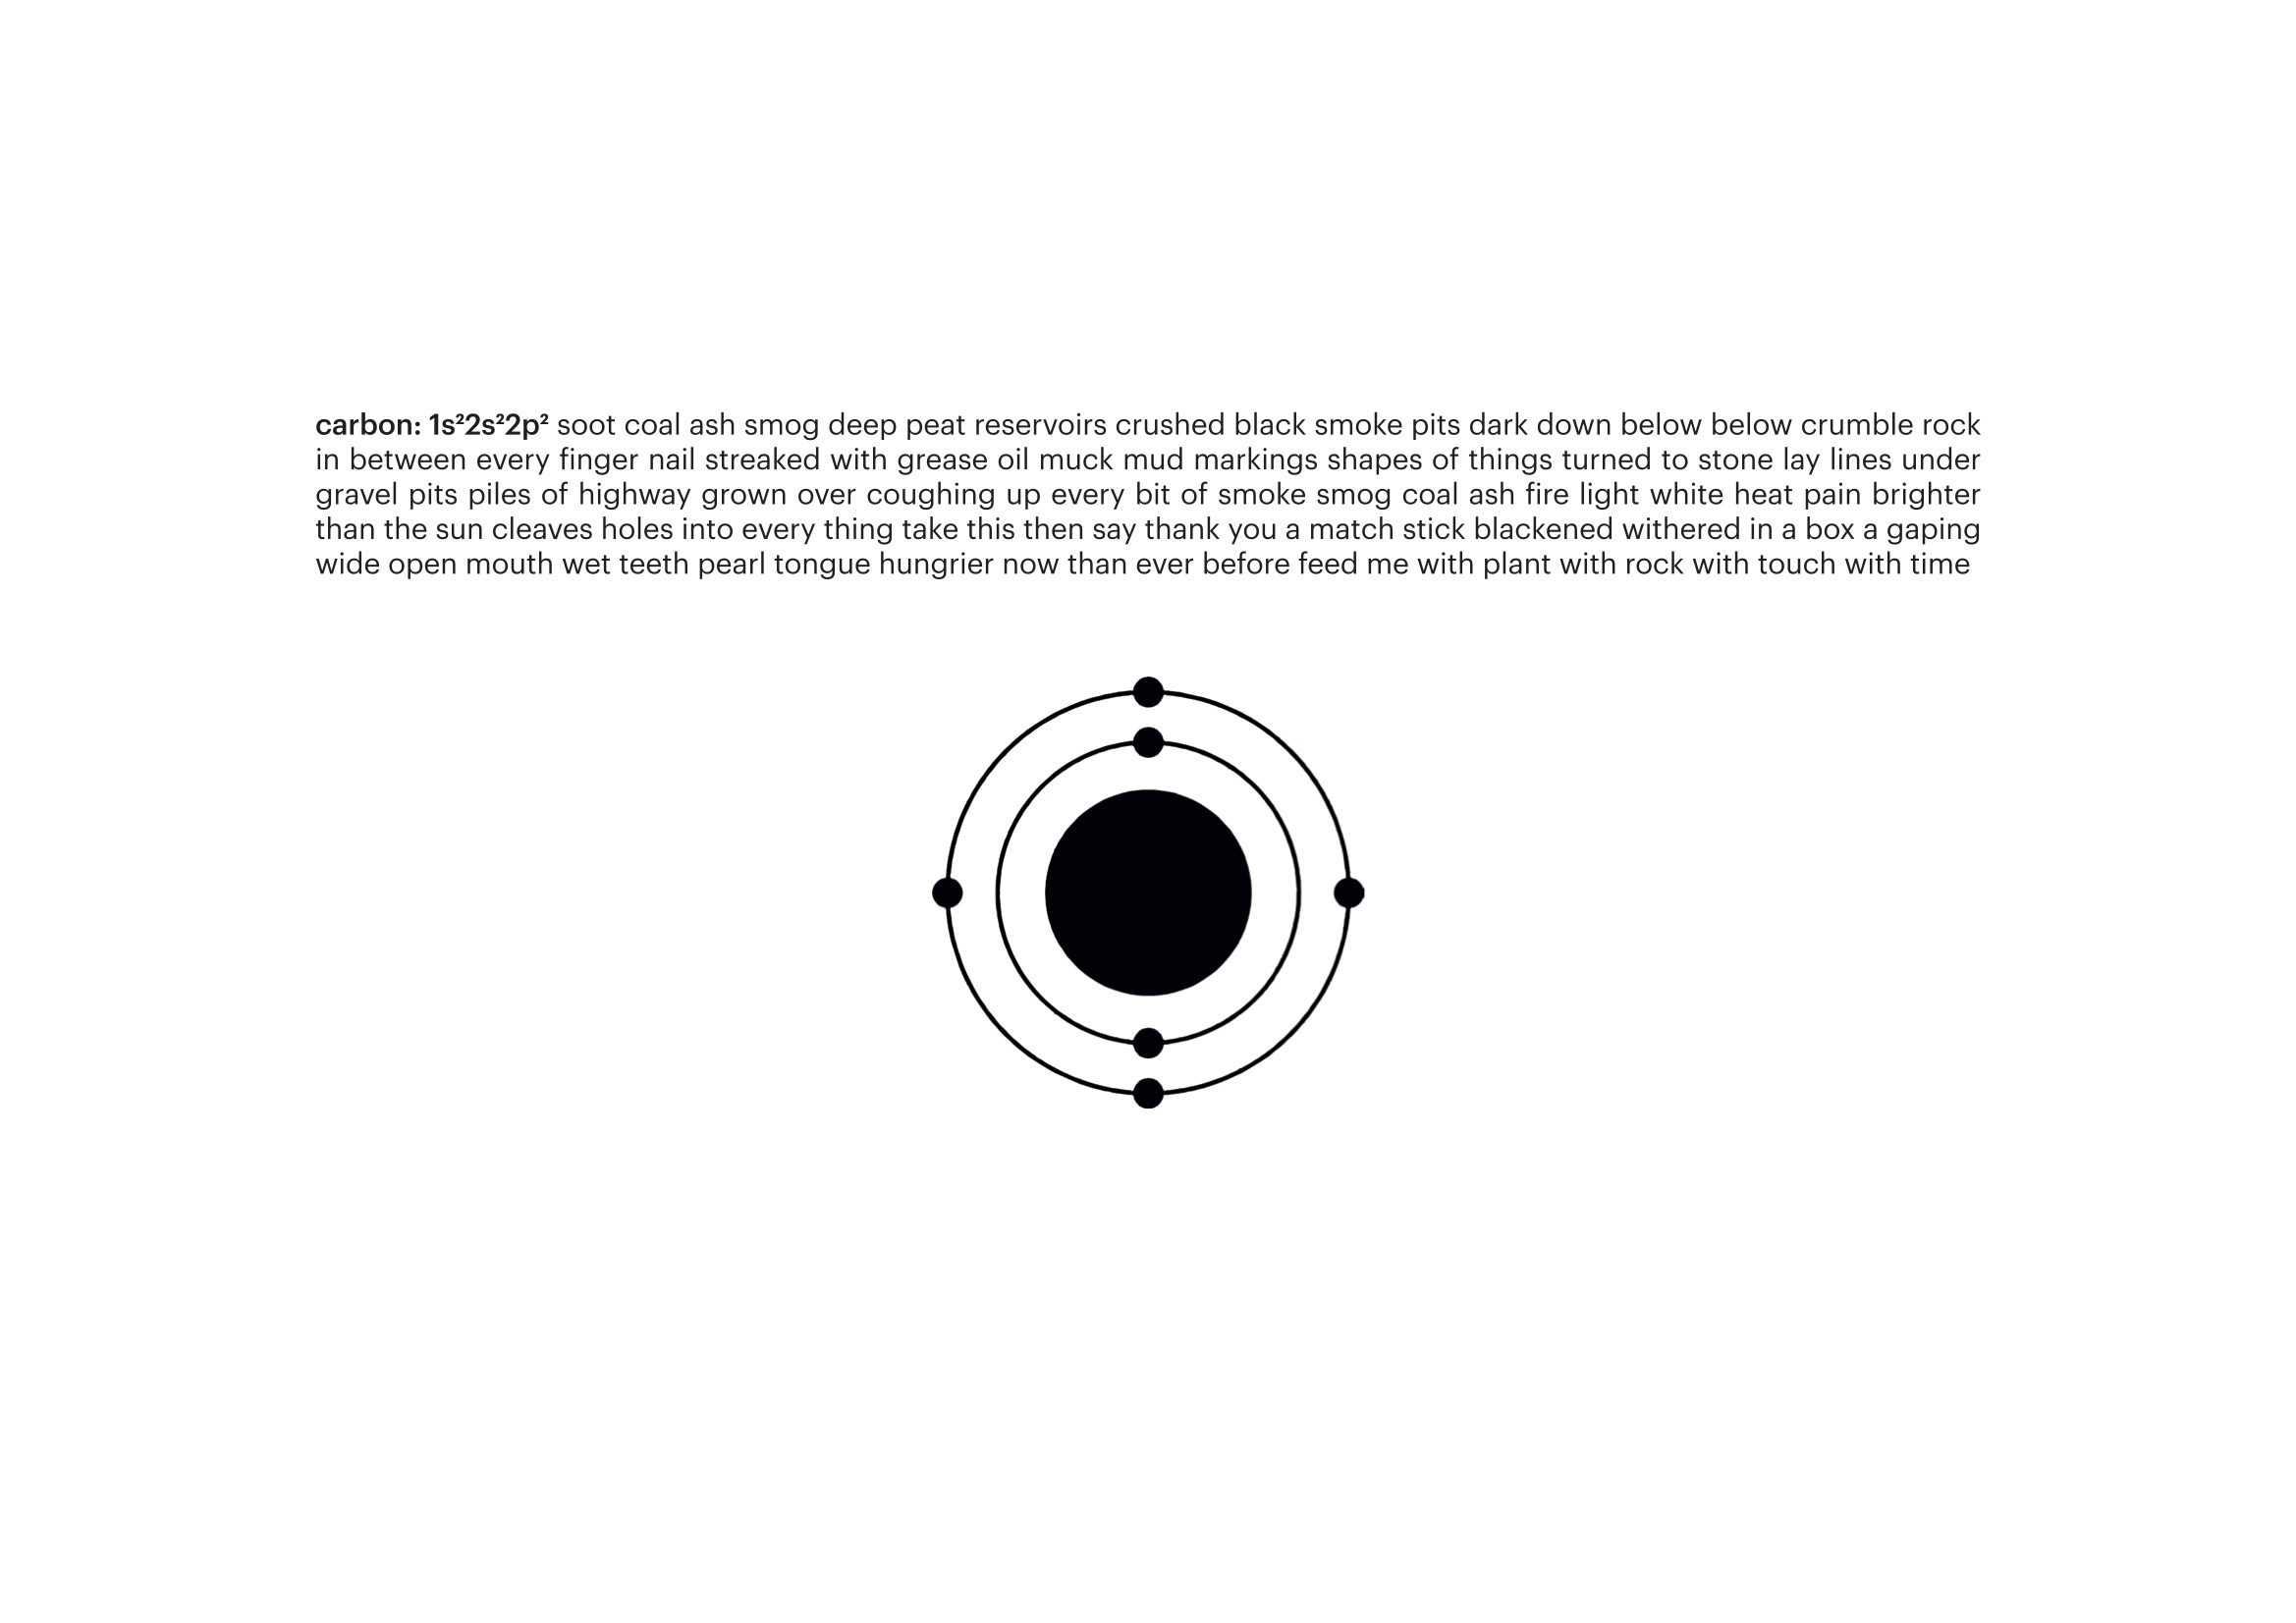 There is a poem, and below it there is a centered drawing of a carbon atom. The title of the poem is in bold, and says ‘carbon: 1s22s22p2’.  Underneath is the poem: ’soot coal ash smog deep peat reservoirs crushed black smoke pits dark down below below crumble rock/ in between every finger nail streaked with grease oil muck mud markings shapes of things turned to stone lay lines under/ gravel pits piles of highway grown over coughing up every bit of smoke smog coal ash fire light white heat pain brighter/ than the sun cleaves holes into every thing take this then say thank you a match stick blackened withered in a box a gaping/ wide open mouth wet teeth pearl tongue hungrier now than ever before feed me with plant with rock with touch with time’